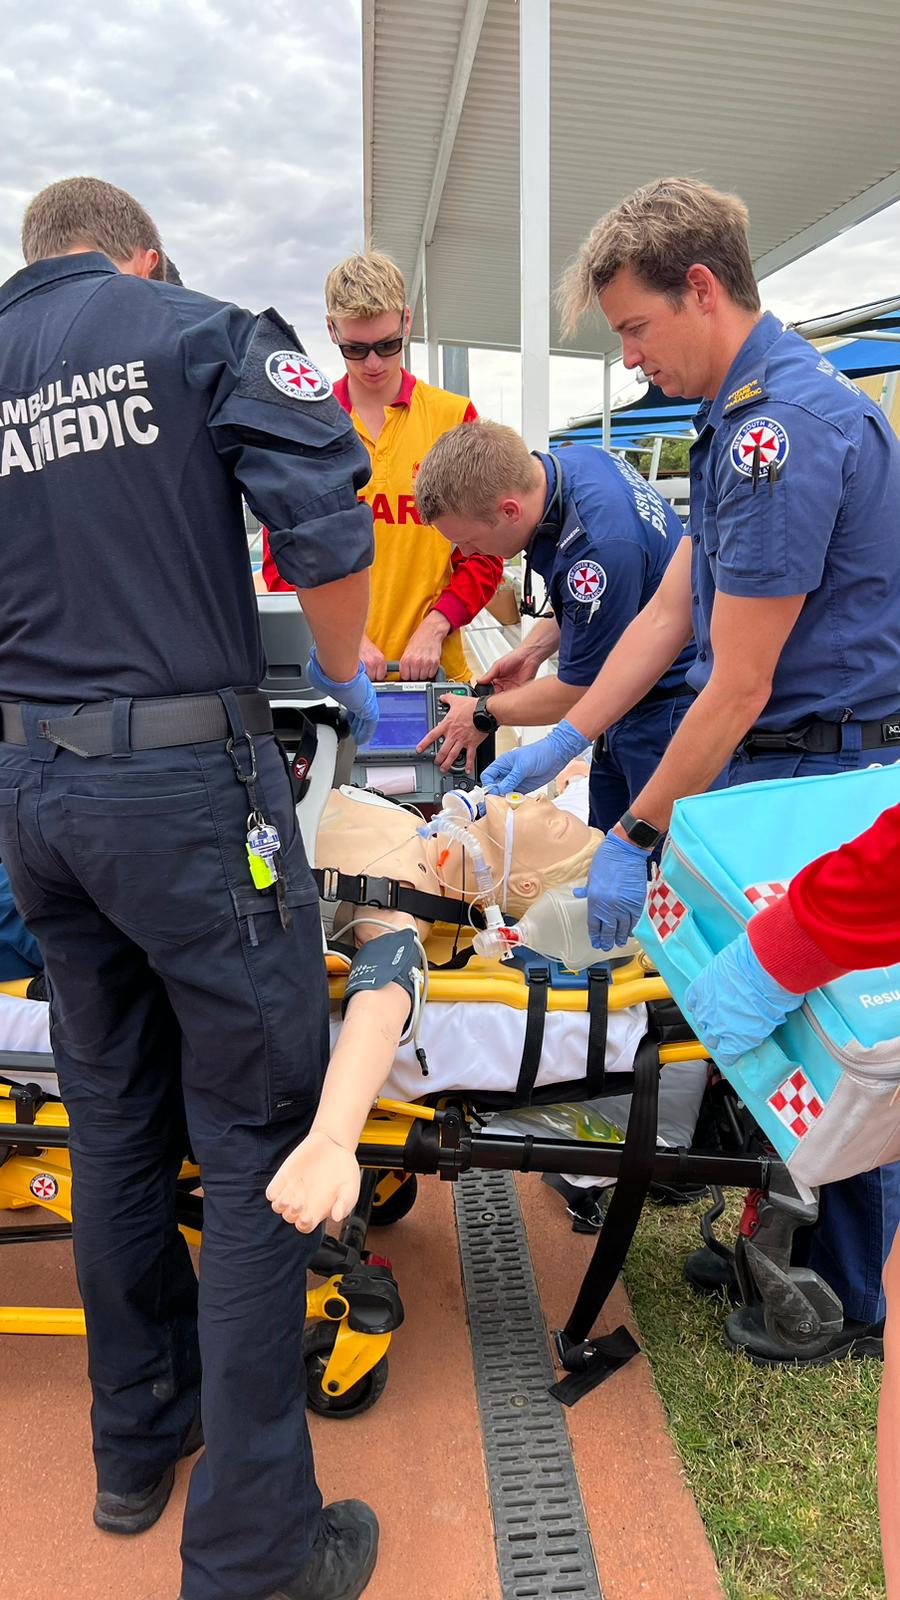 NSW Ambulance paramedics training Oasis staff during a water rescue and resuscitation simulation.